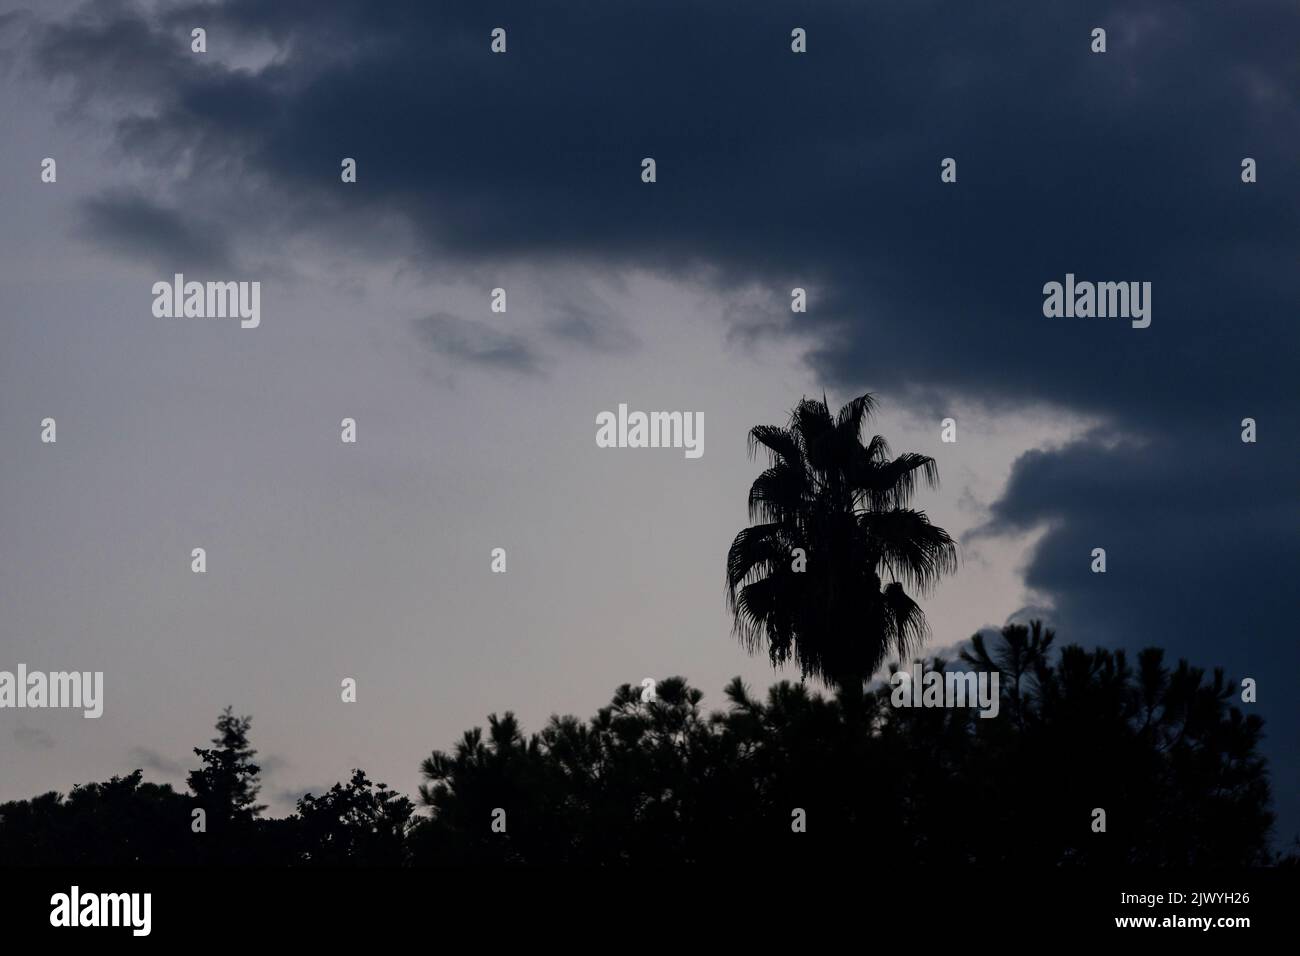 a palm tree shade in the evening Stock Photo